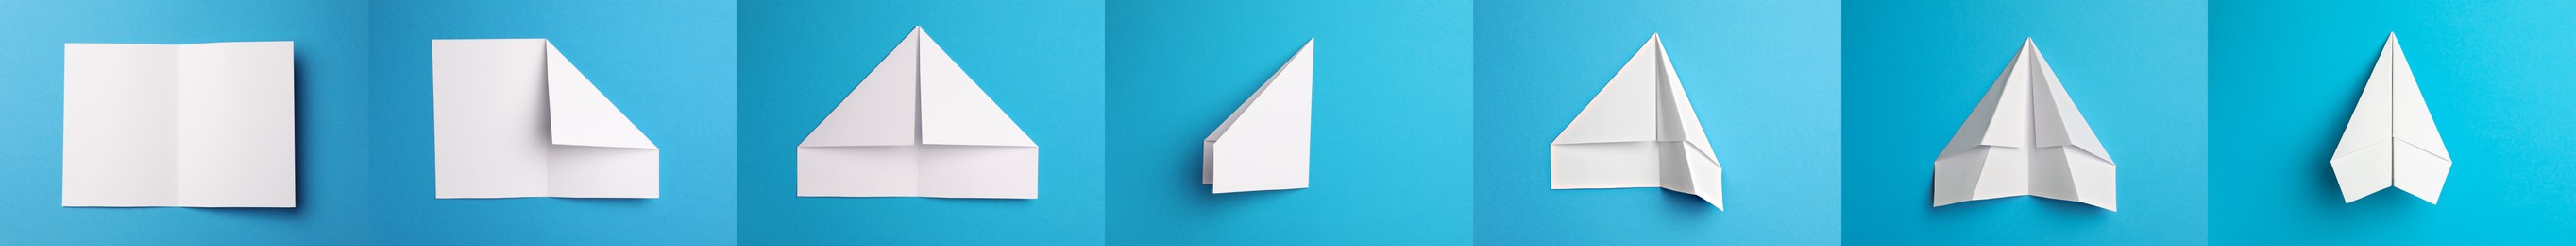 Image of How to make paper plane: step by step instruction. Collage with photos of folded white paper sheets on light blue background, top view. Banner design